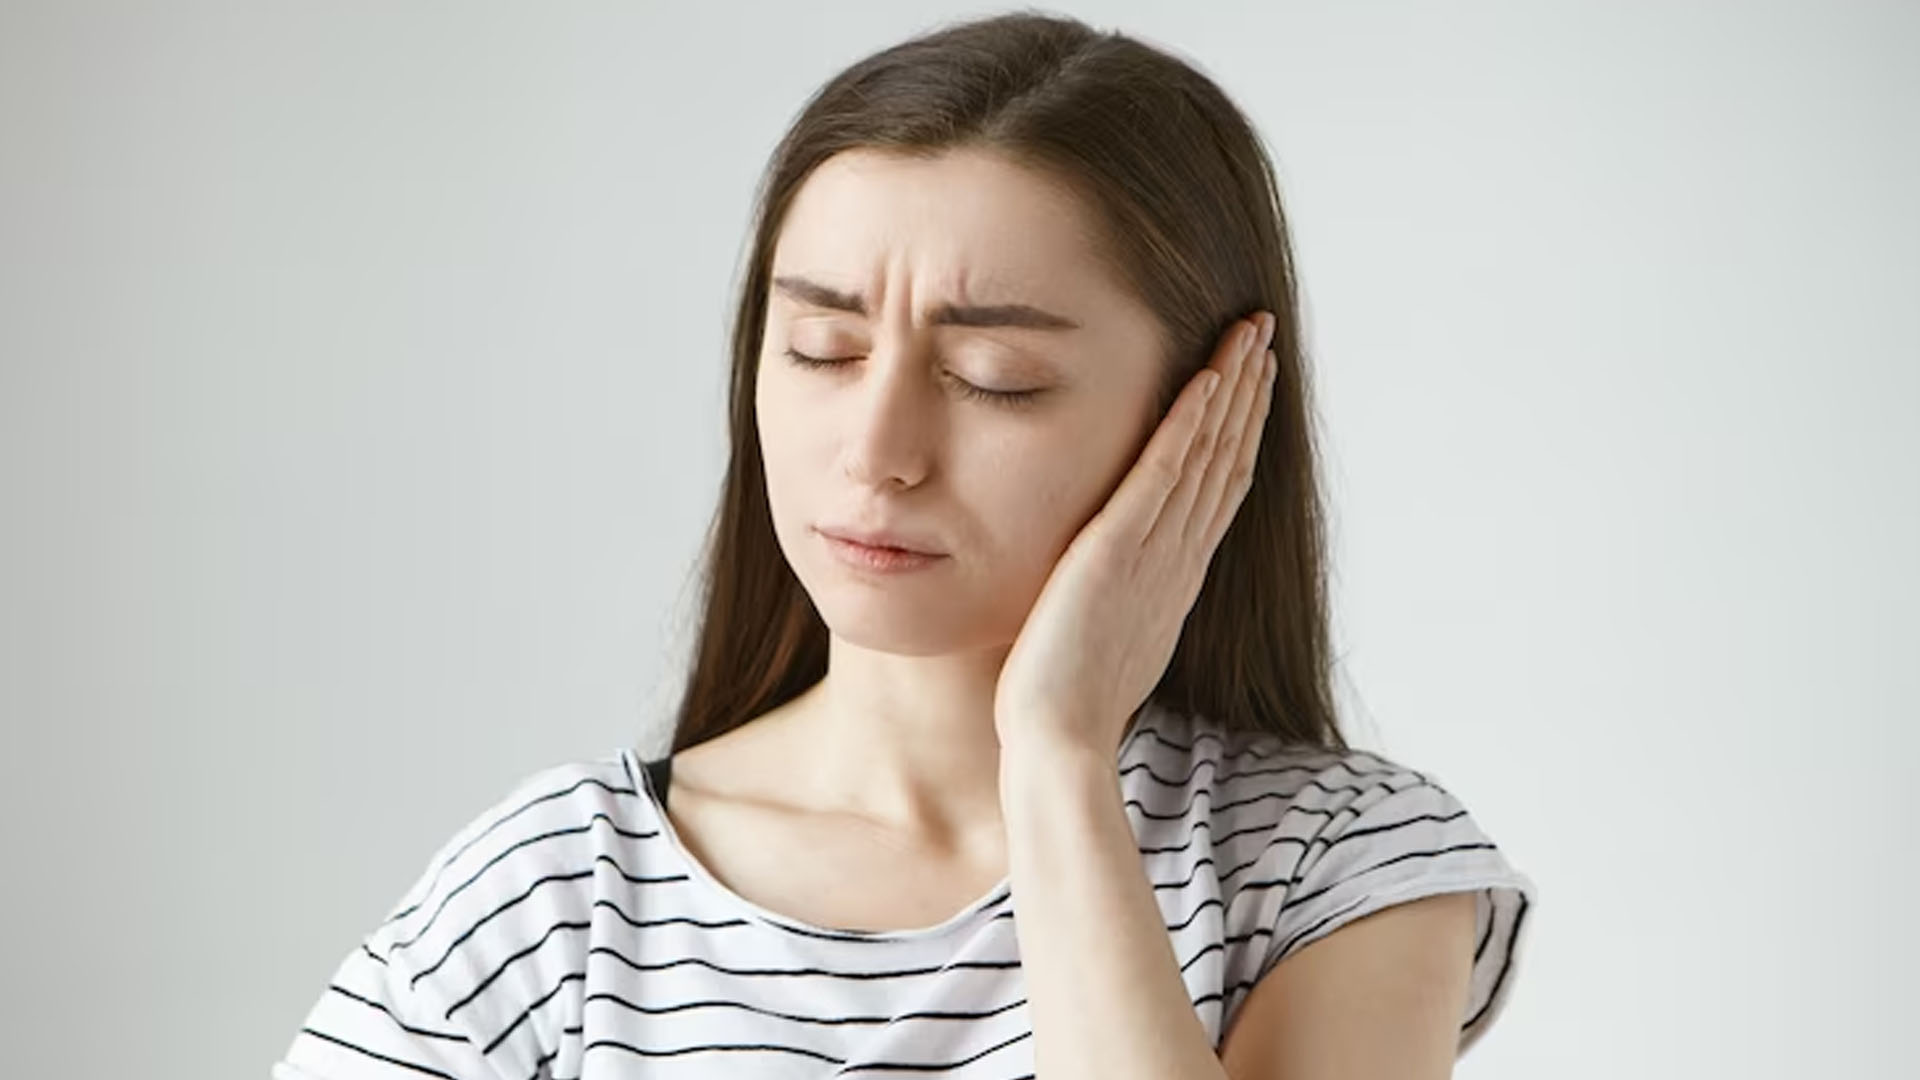 What are the Symptoms of Ear Pain?